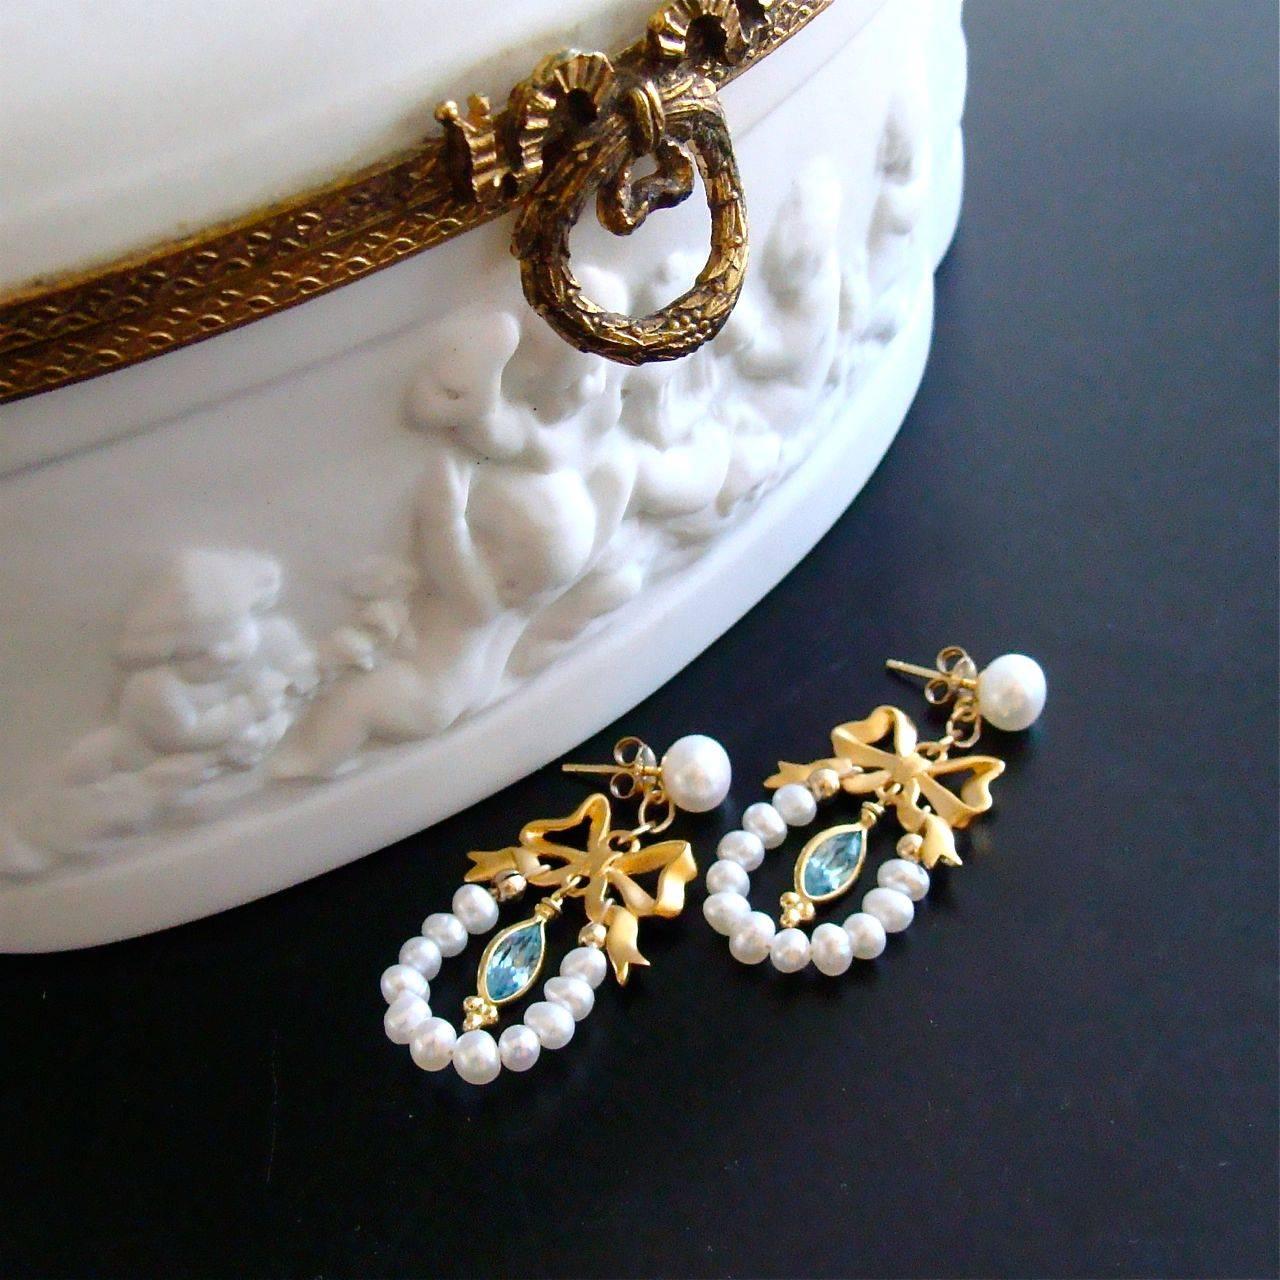 Cassandra Earrings.

Sweet little gold vermeil bows sit perched below freshwater pearl studs and form the easily recognizable Regency hallmark of that era.  Draped below these charming bows, are freshwater button seed pearls - which serve as the